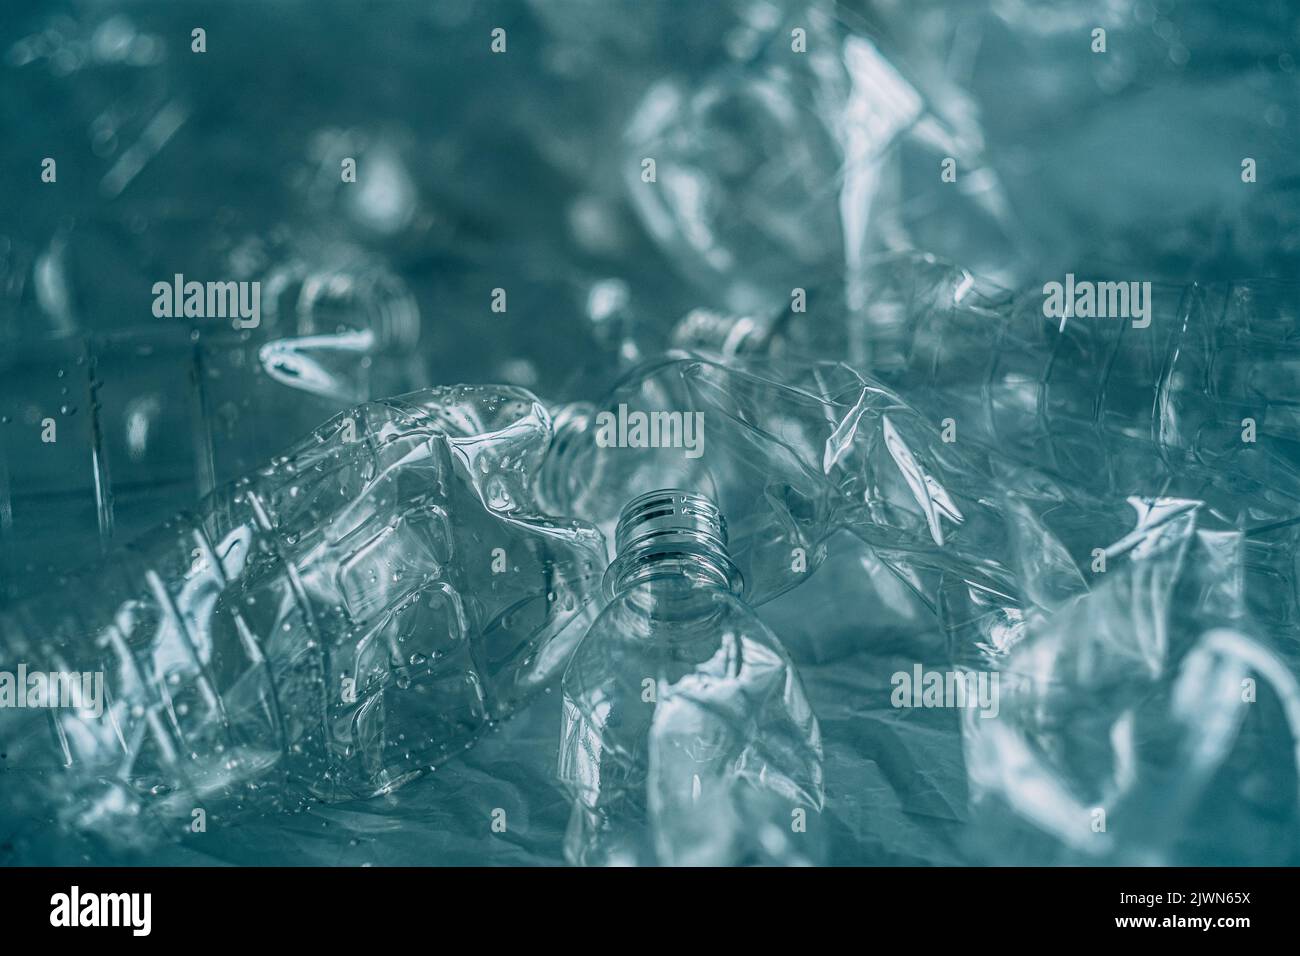 ocean pollution plastic recycling bottles texture Stock Photo